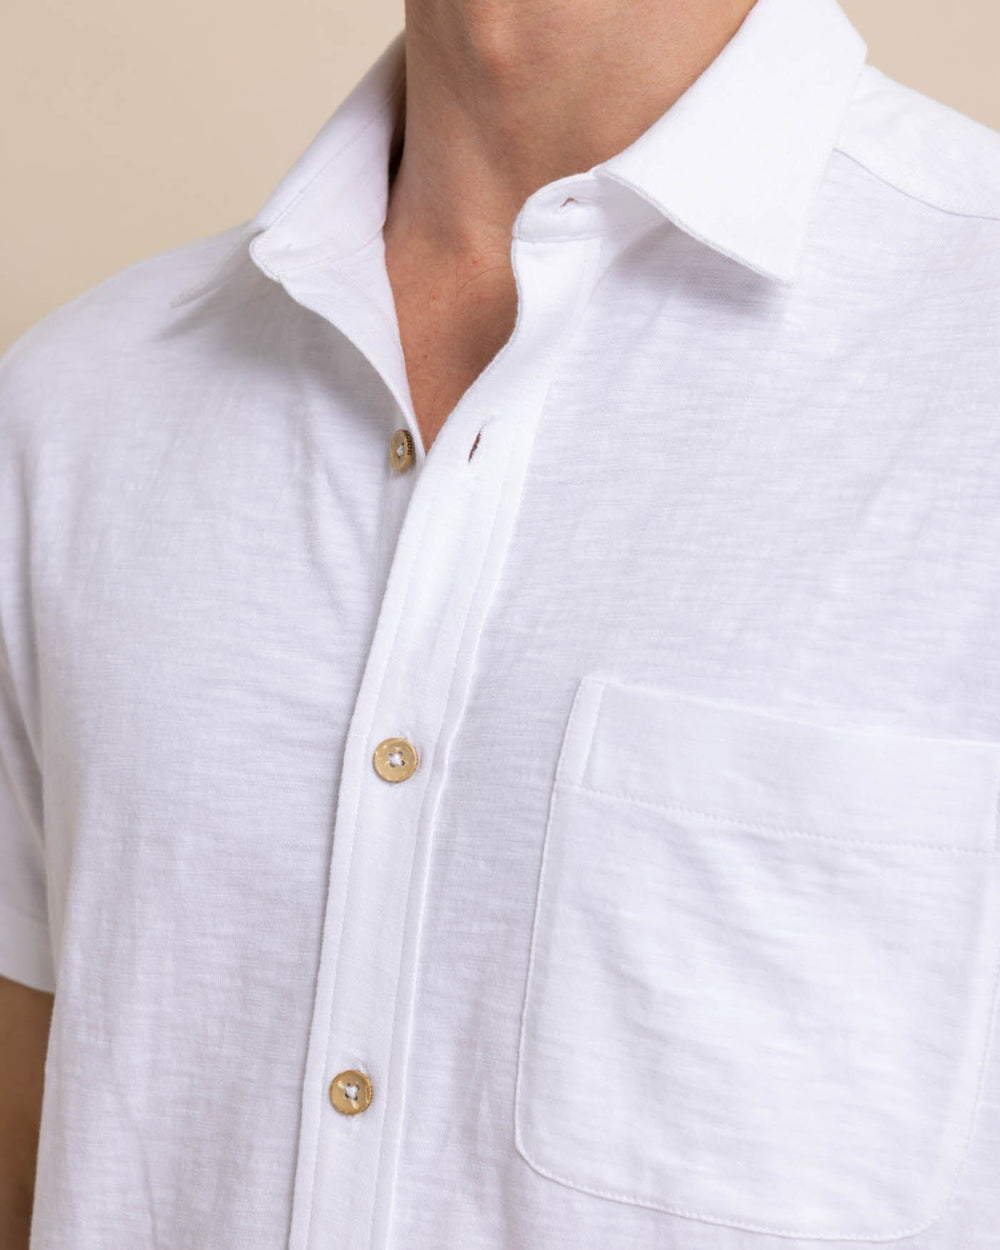 The detail view of the Southern Tide Beachcast Solid Knit Short Sleeve Sport Shirt by Southern Tide - Classic White